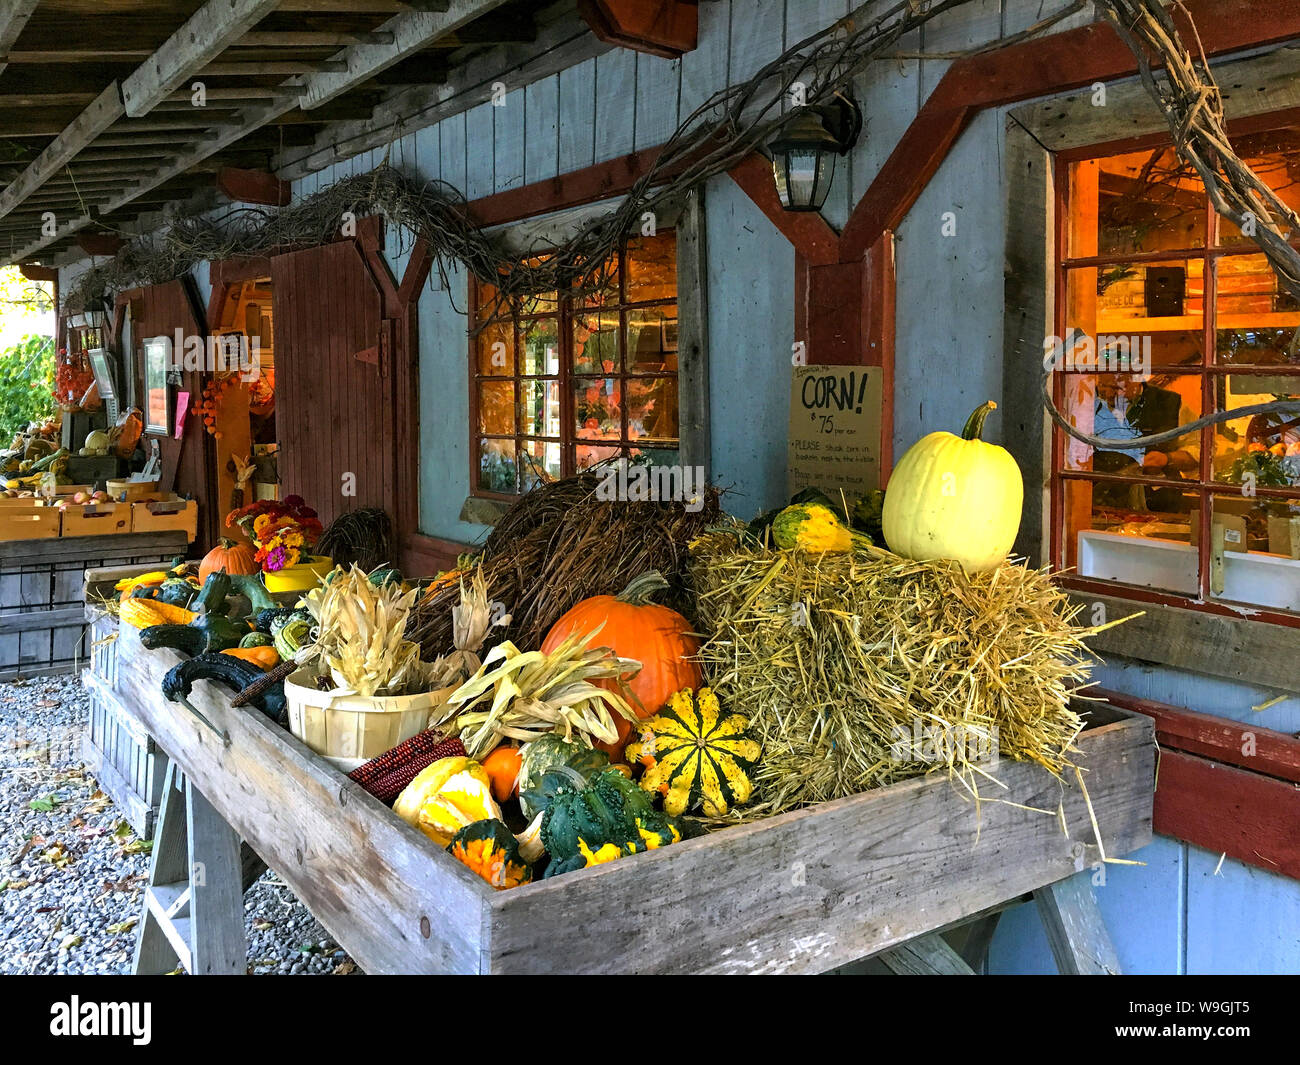 Manchester-by-the-Sea, Mass / USA - Oct 18, 2018: Charming autumn harvest pumpkin display at a New England farm stand. Fresh produce is grown locally. Stock Photo